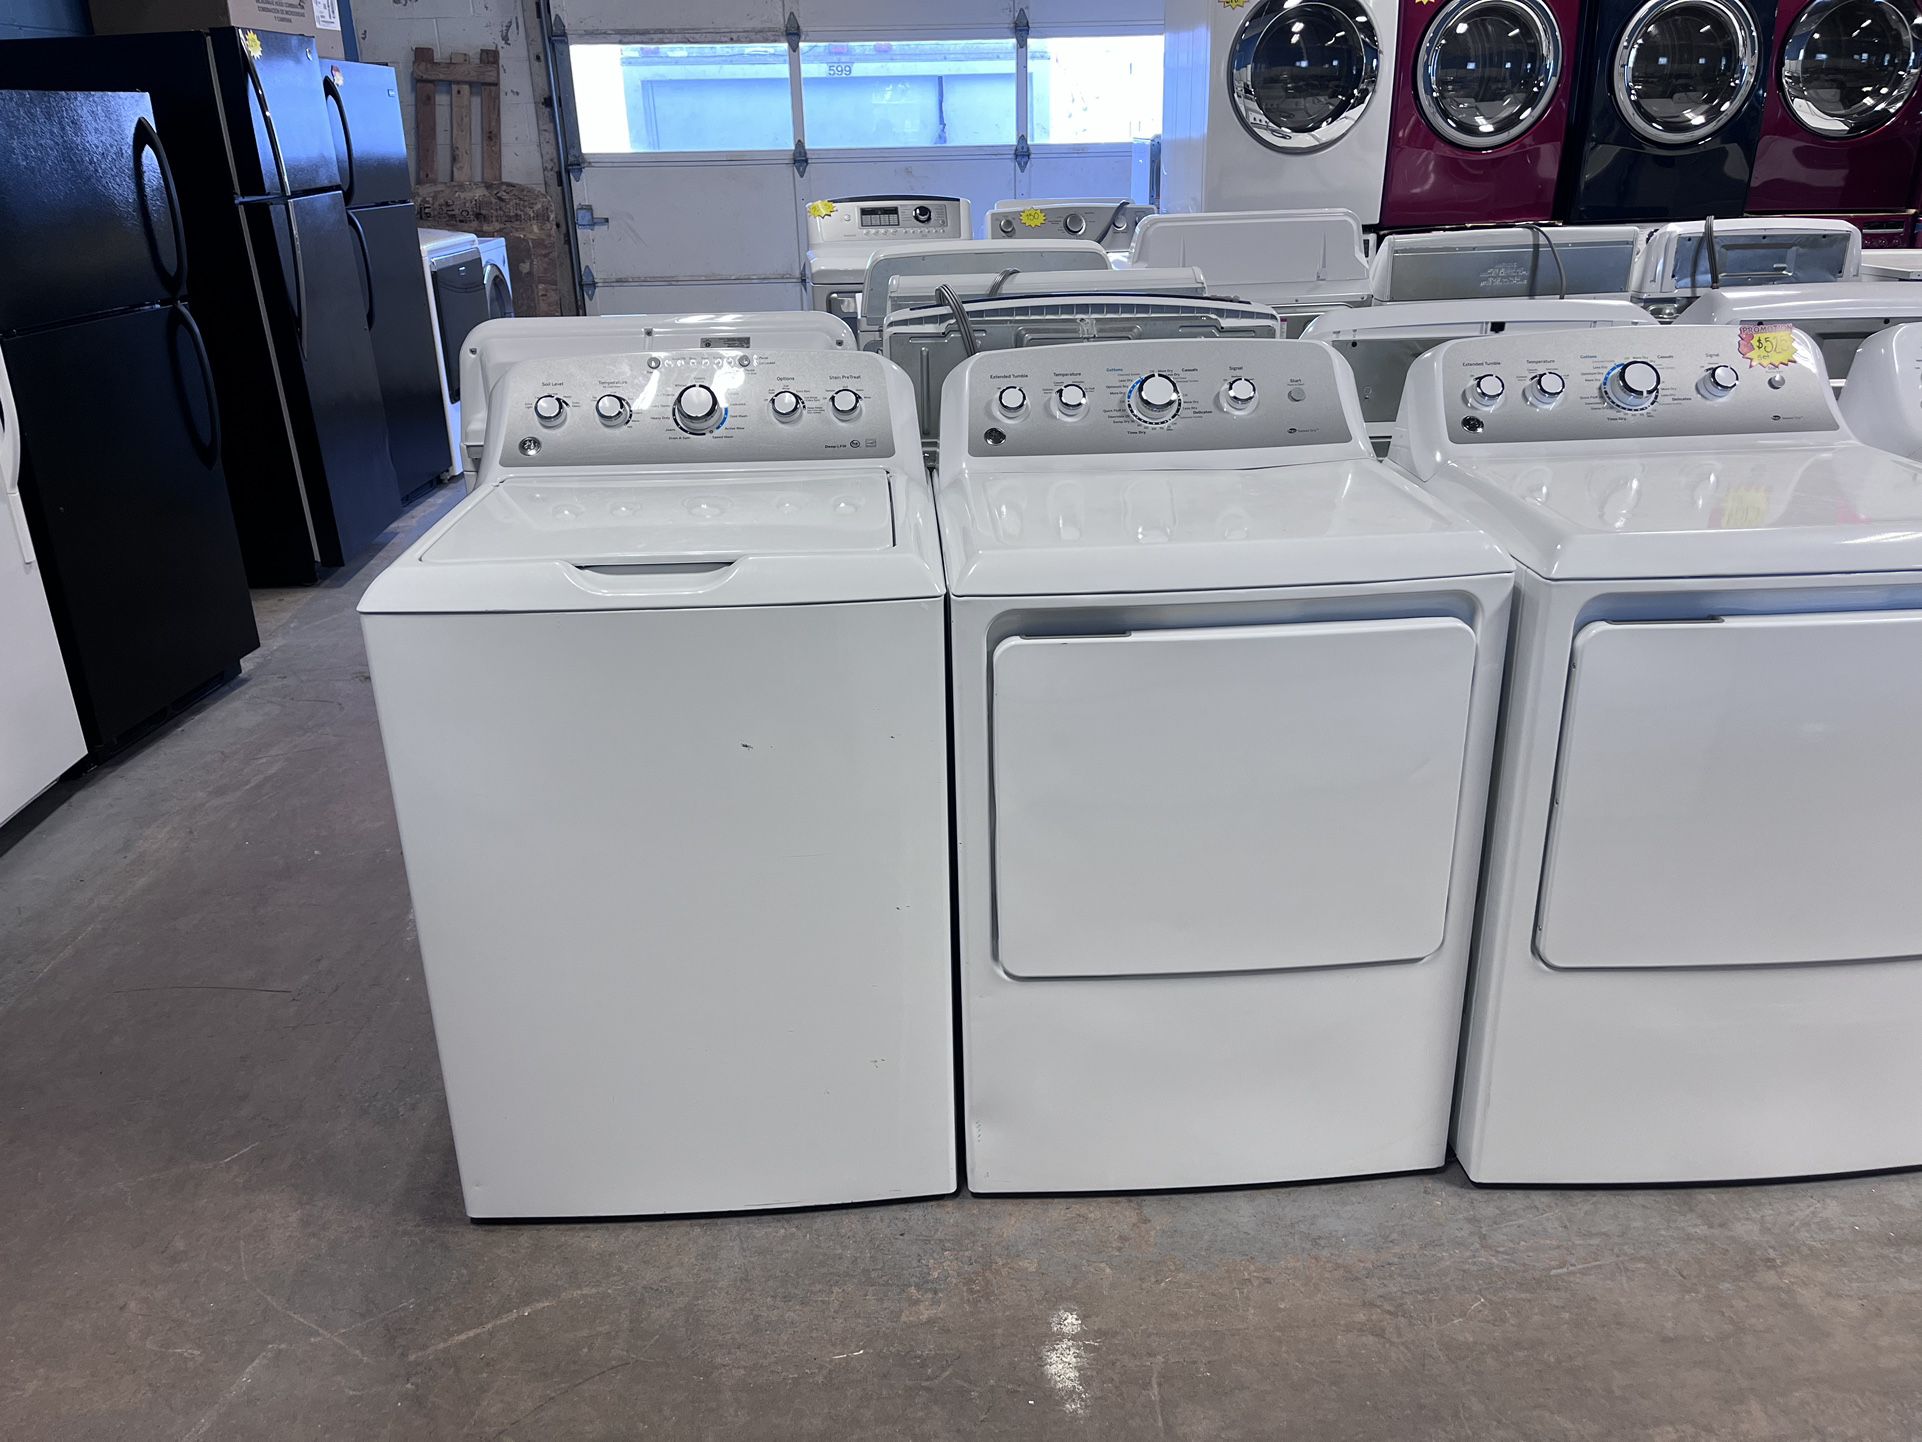 Set ge Washer And Dryer Large Capacity Everything Work Very Clean With Warranty 